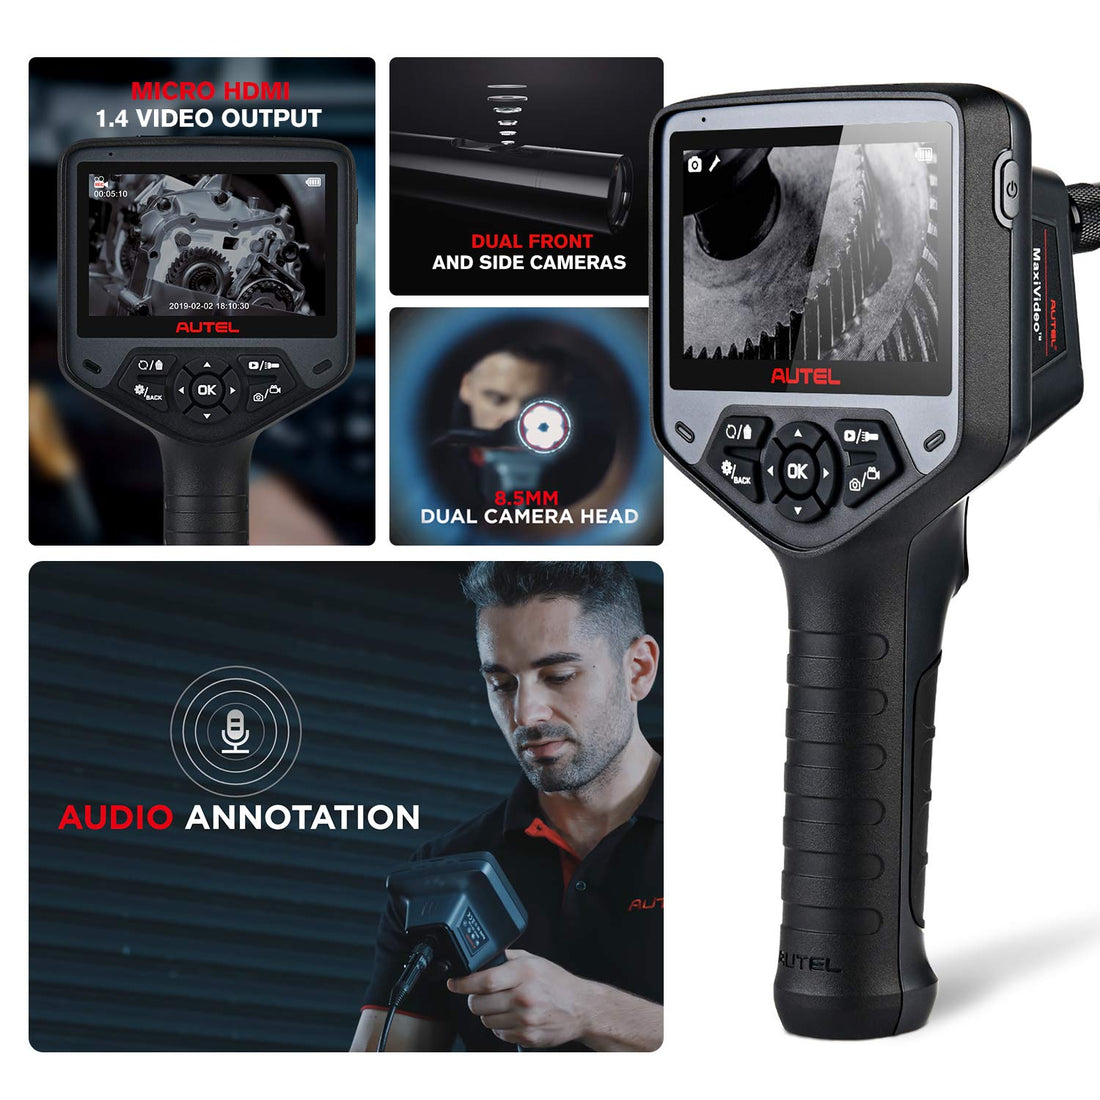 Autel MaxiVideo MV480 Inspection Camera, 1080P HD Industrial Endoscope Video Scope, Videoscope with Audio Annotation, Dual Cameras, 360°Rotation, 7 X Zoom, Upgraded Ver. of MV460